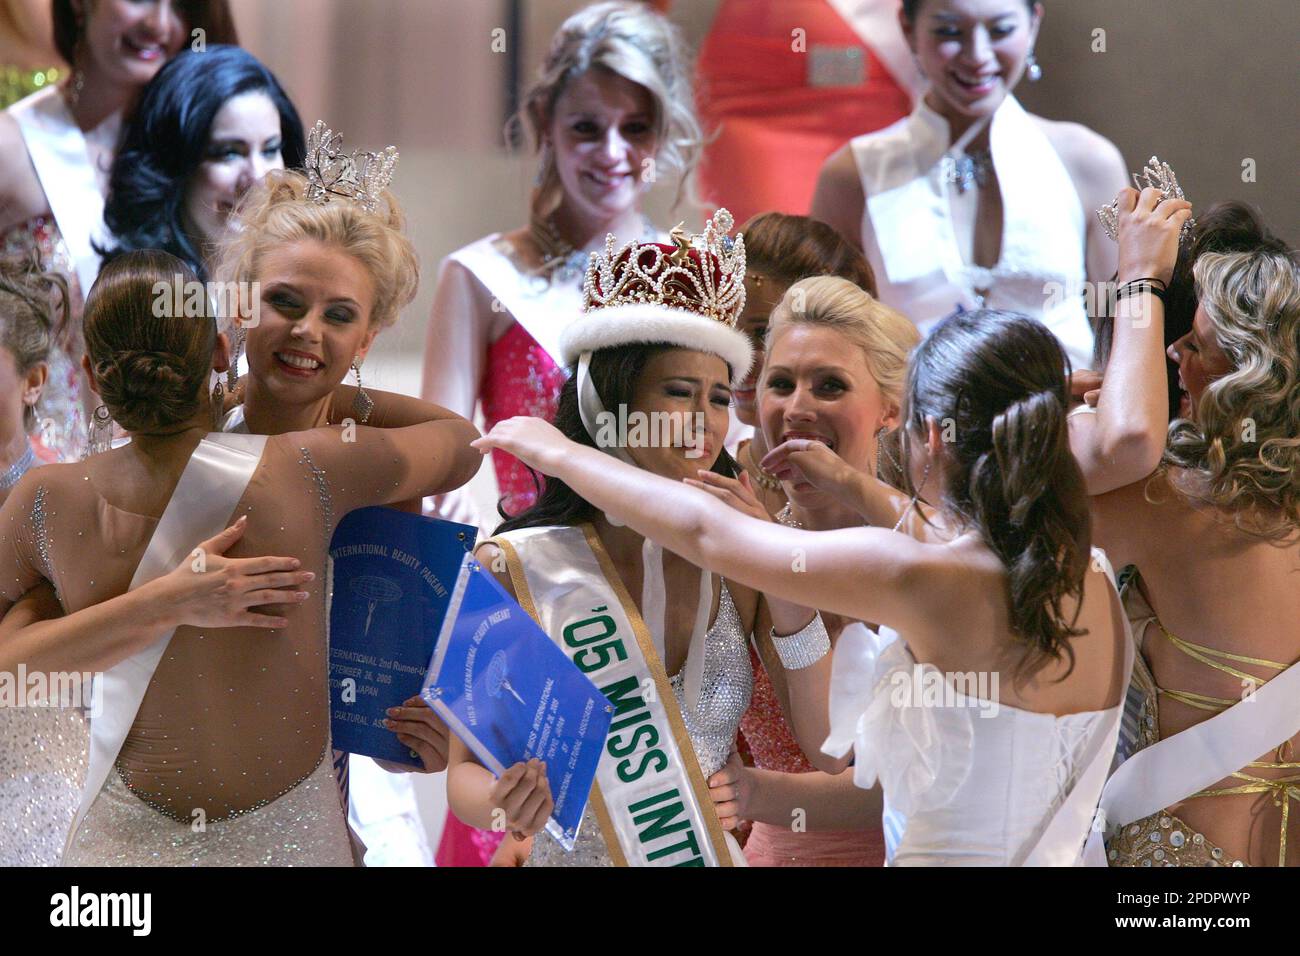 Precious Lara Quigaman of the Philippines, center, reacts as she is named as this year's Miss International while other contestants gather around her for congratulations in Tokyo, Monday, Sept 26, 2005. Also presenting are the runnerup Susanna Laine of Finland, left with crown, and 2nd runner up Yadira Geara of Dominican Republic, right with crown. (AP Photo/Shizuo Kambayashi) Stock Photo